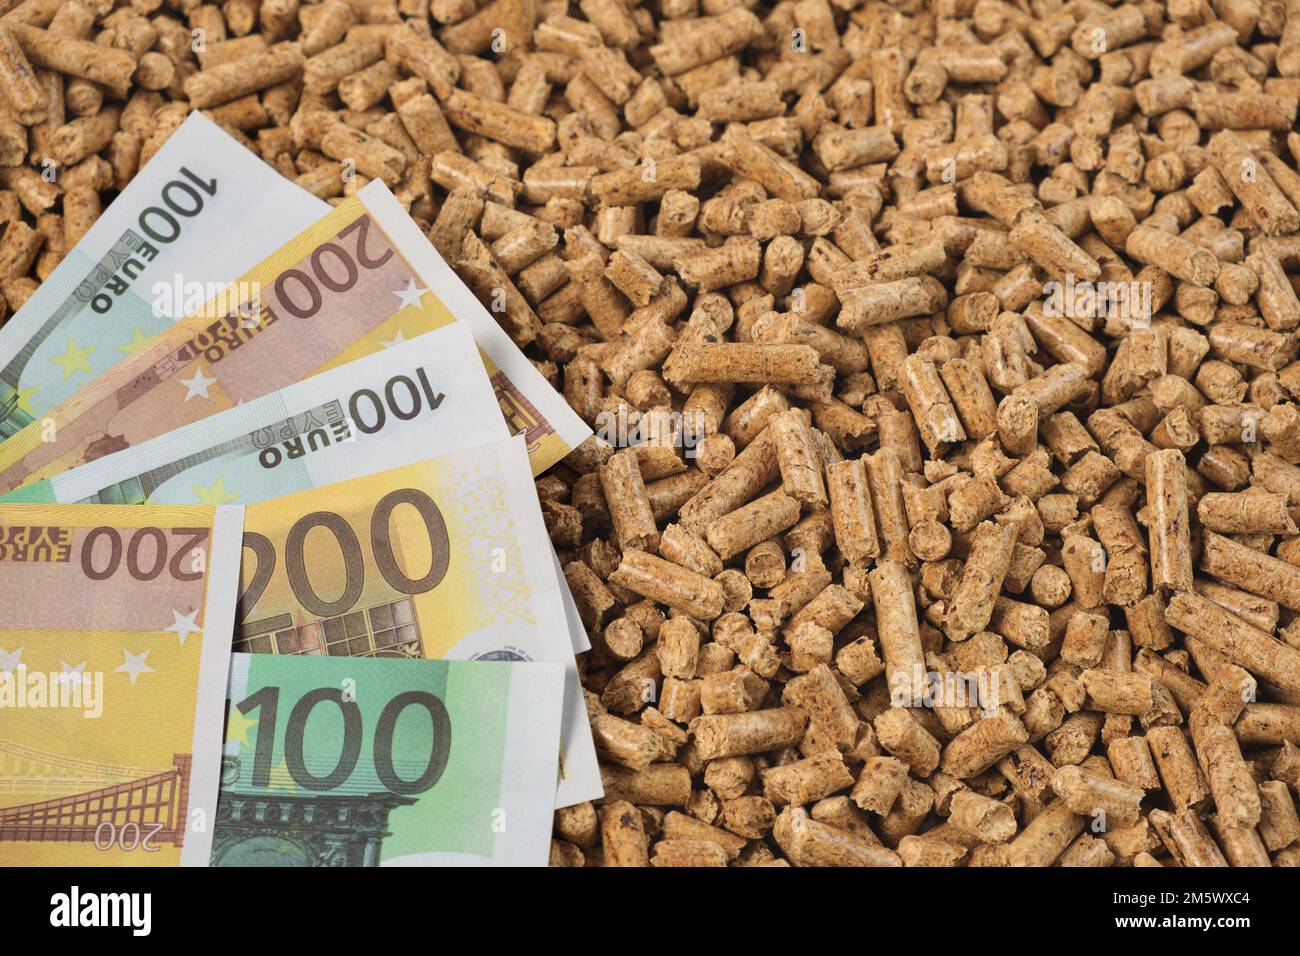 Pellet Fuel. Wood Sawdust Pellets and Paper Banknotes, Money. Euro Currency and Biofuel Compacted Briquettes. Substitute to Coal, Charcoal. World Gas Stock Photo